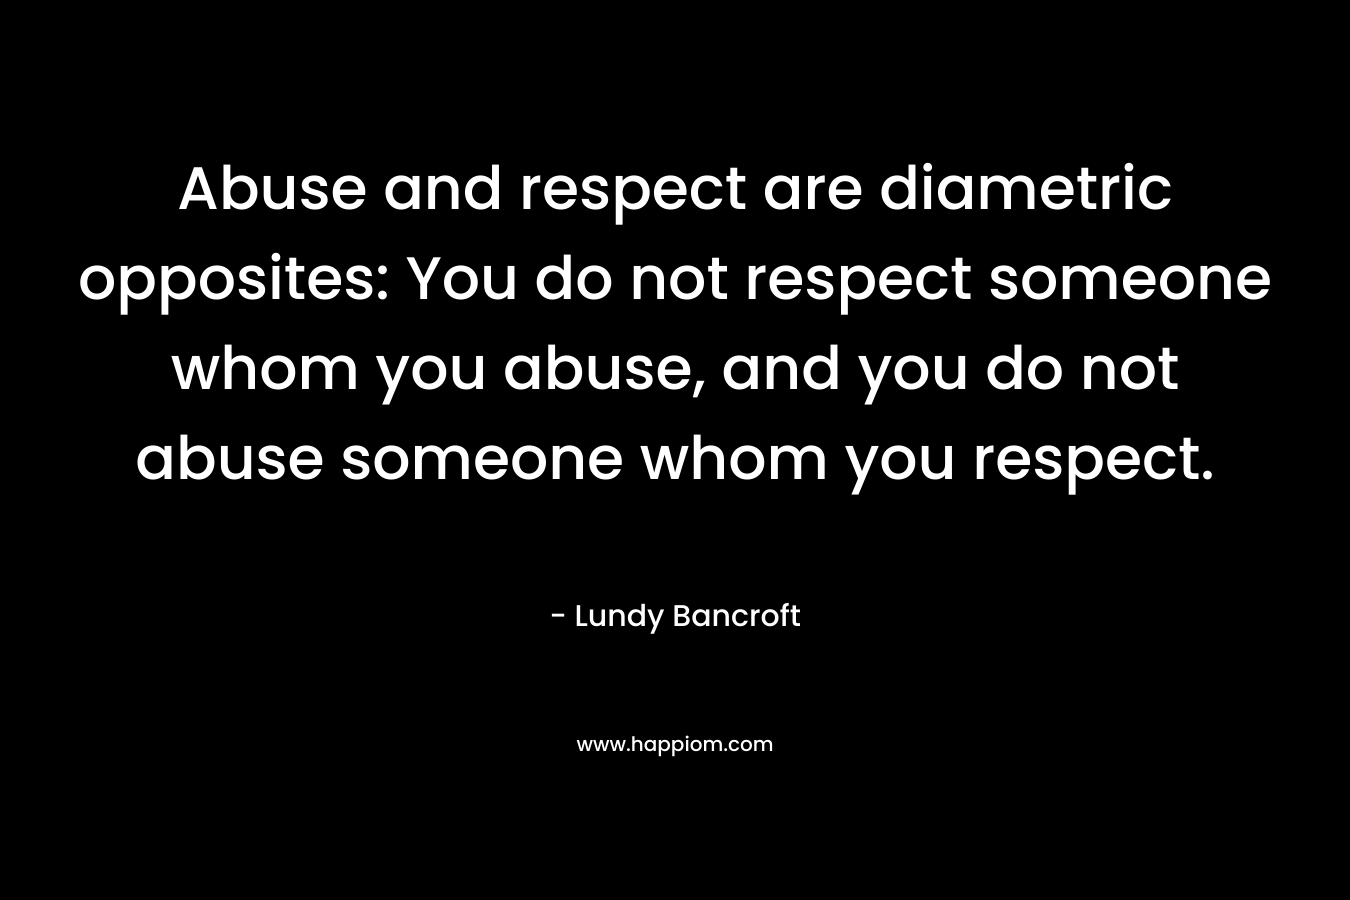 Abuse and respect are diametric opposites: You do not respect someone whom you abuse, and you do not abuse someone whom you respect.